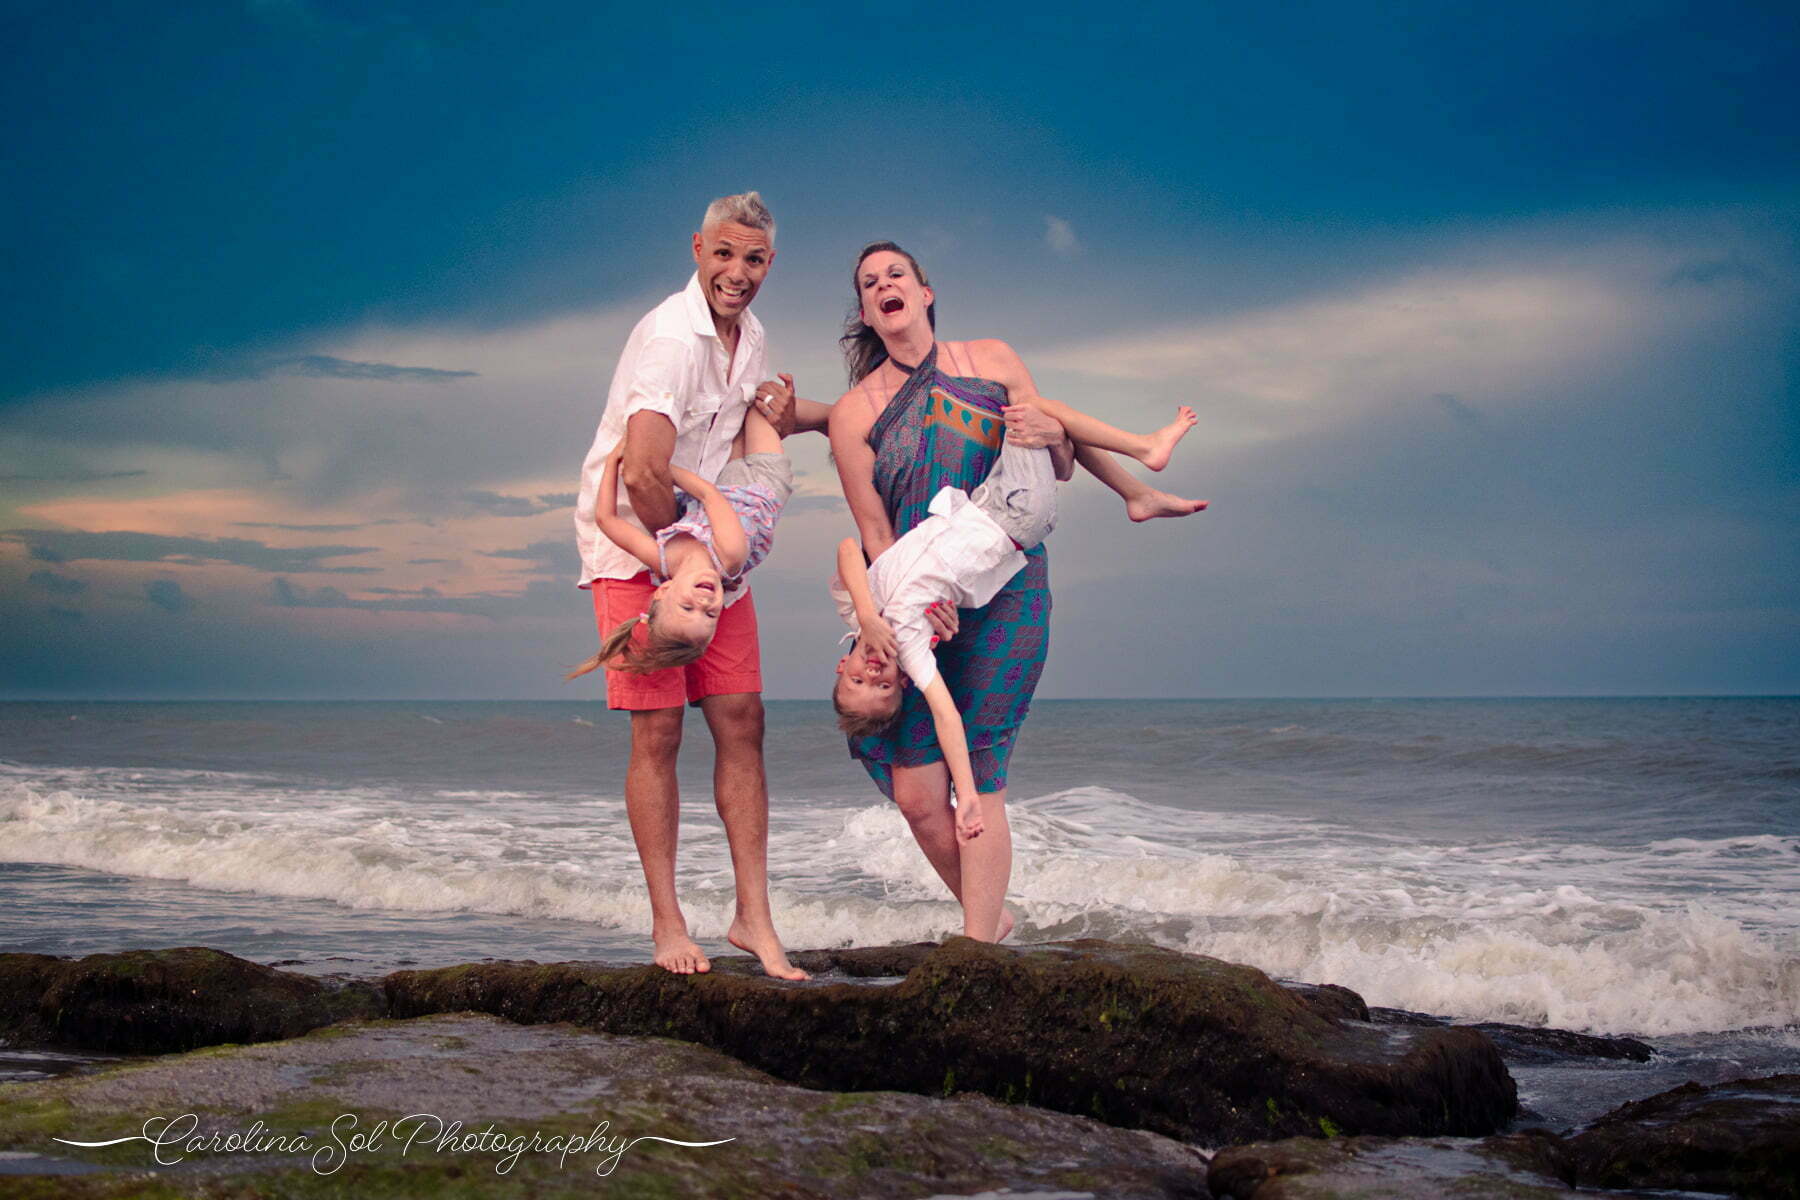 Candid lifestyle family portrait photography session on Kure Beach, NC.